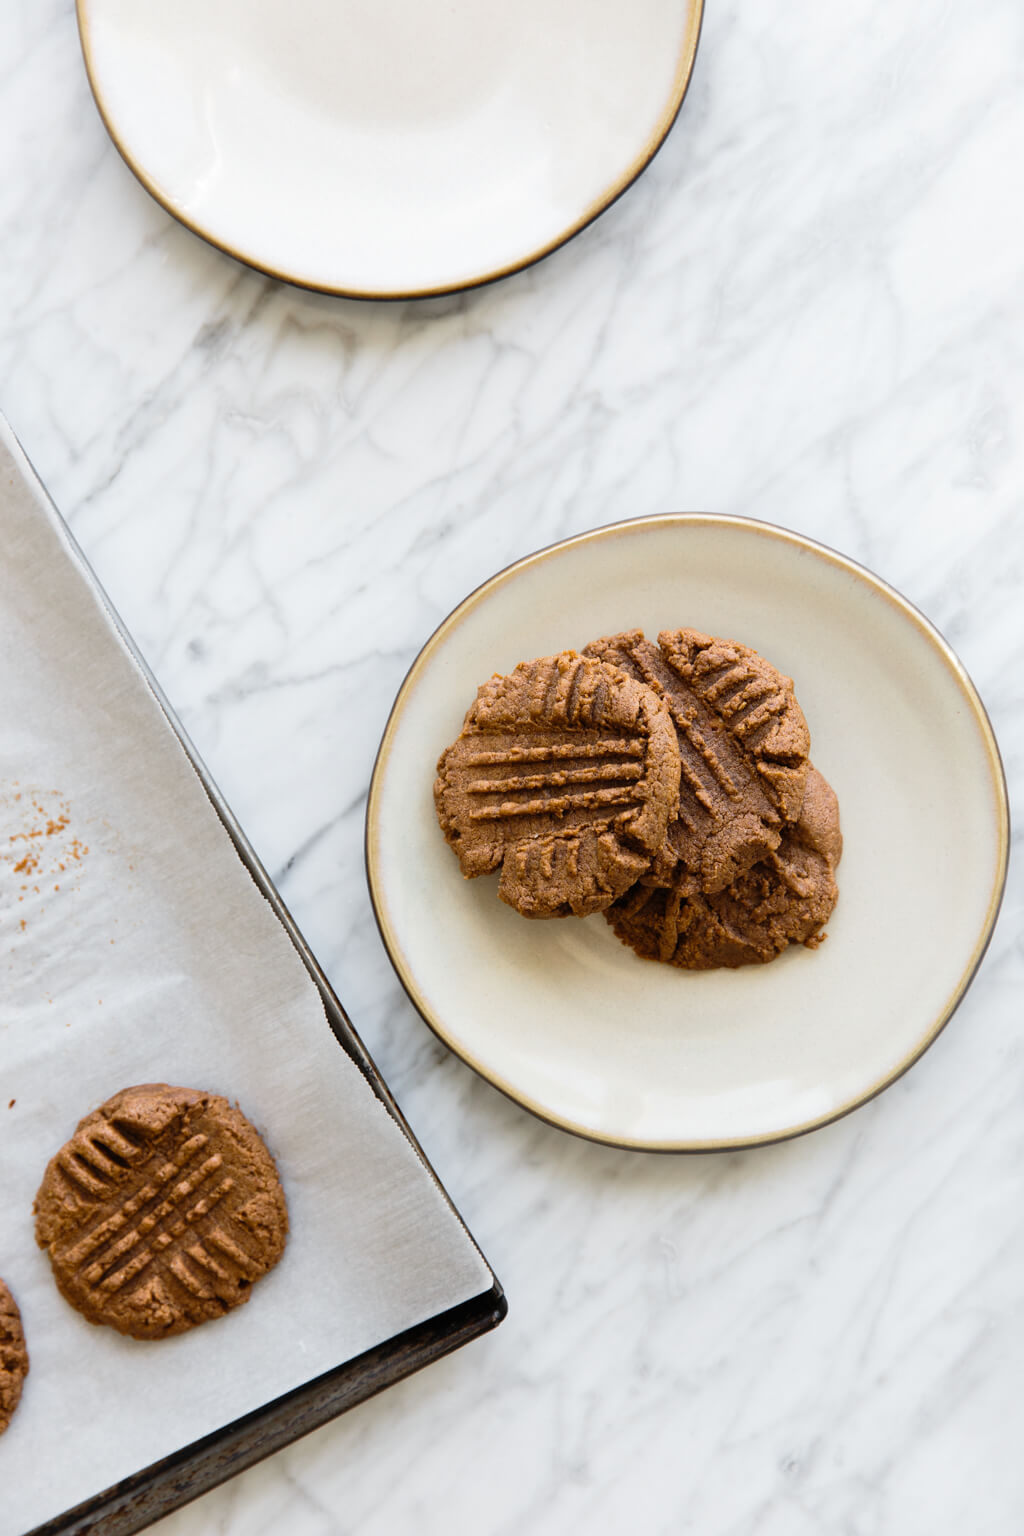 (gluten-free, paleo) These flourless almond butter cookies are tasty and super simple to make!